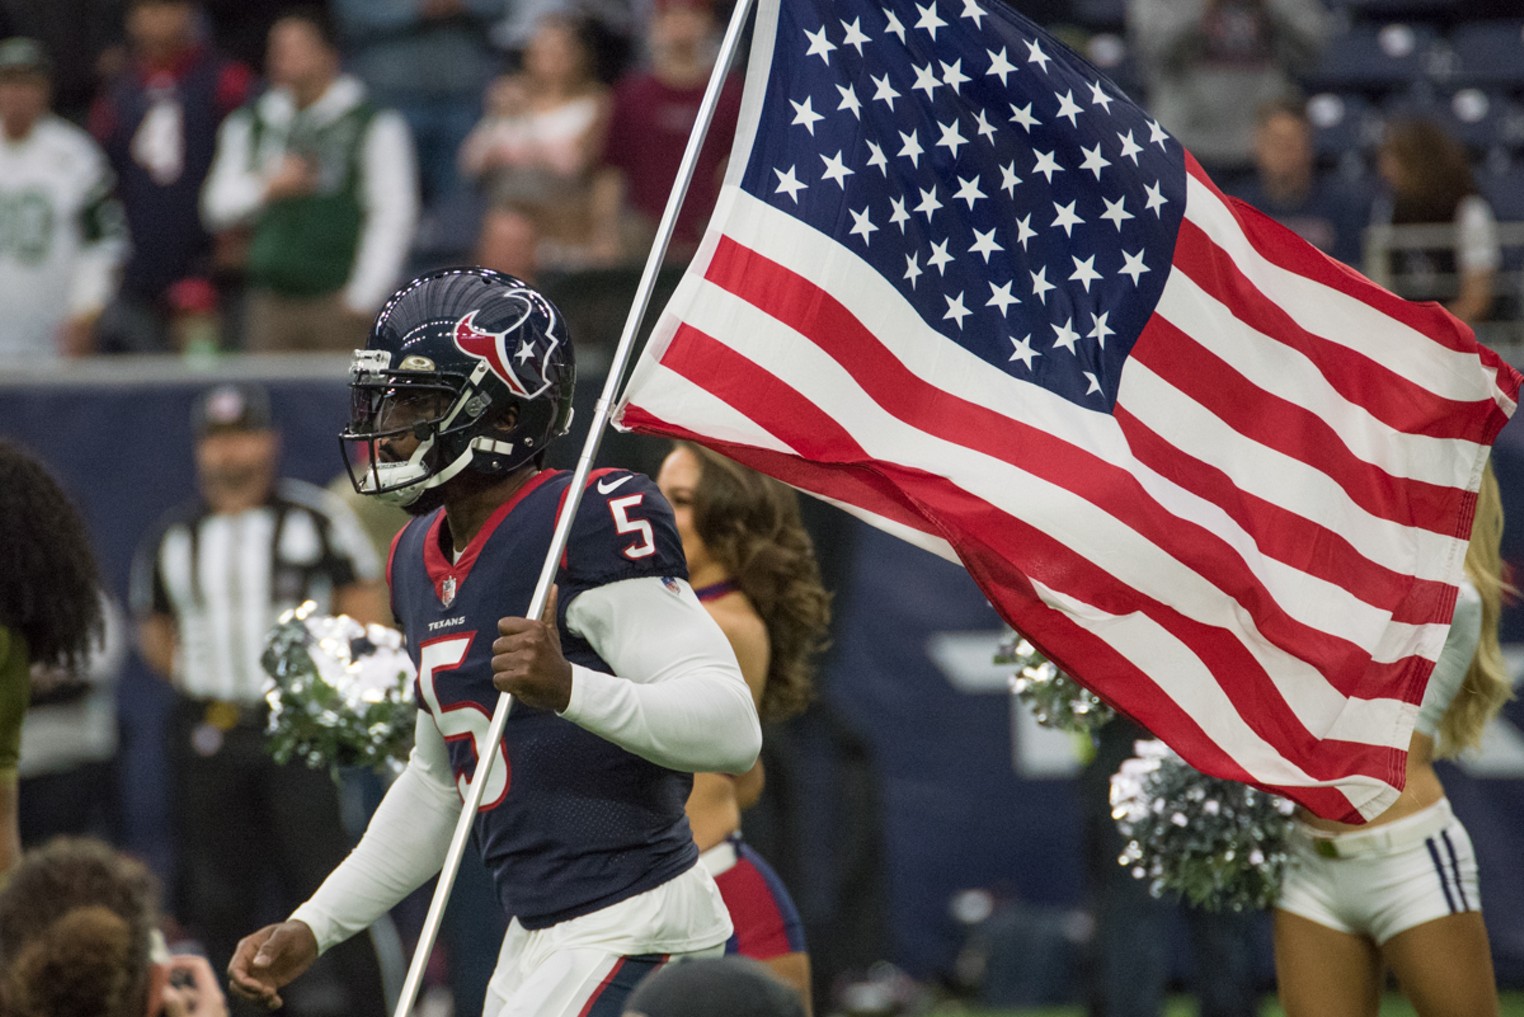 salute to service texans